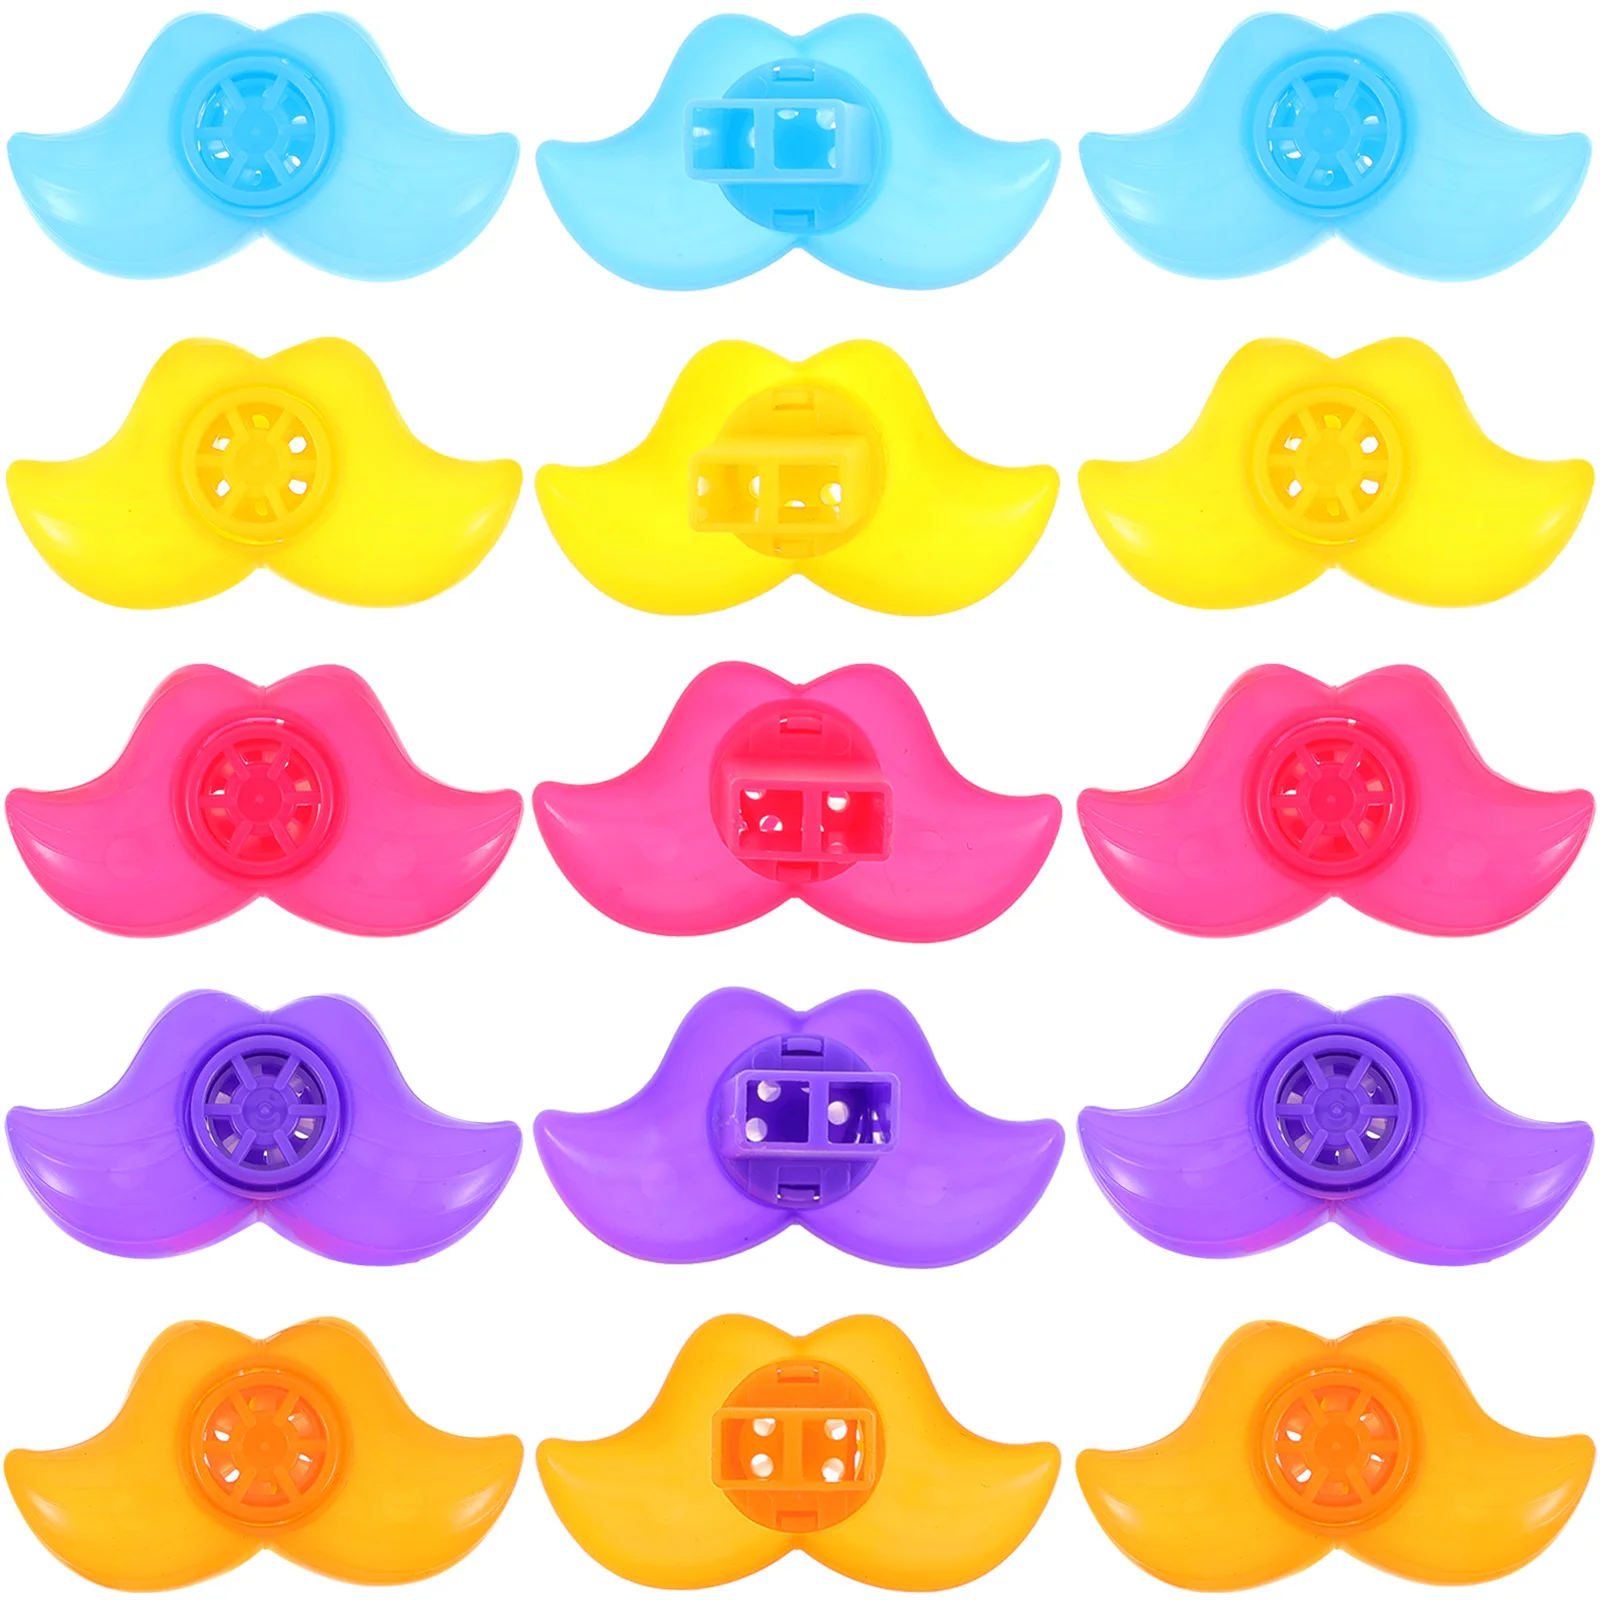 

20Pcs Cheering Whistles Cartoon Blowers Funny Noise Makers Children Whistle Toys Whistles for Party